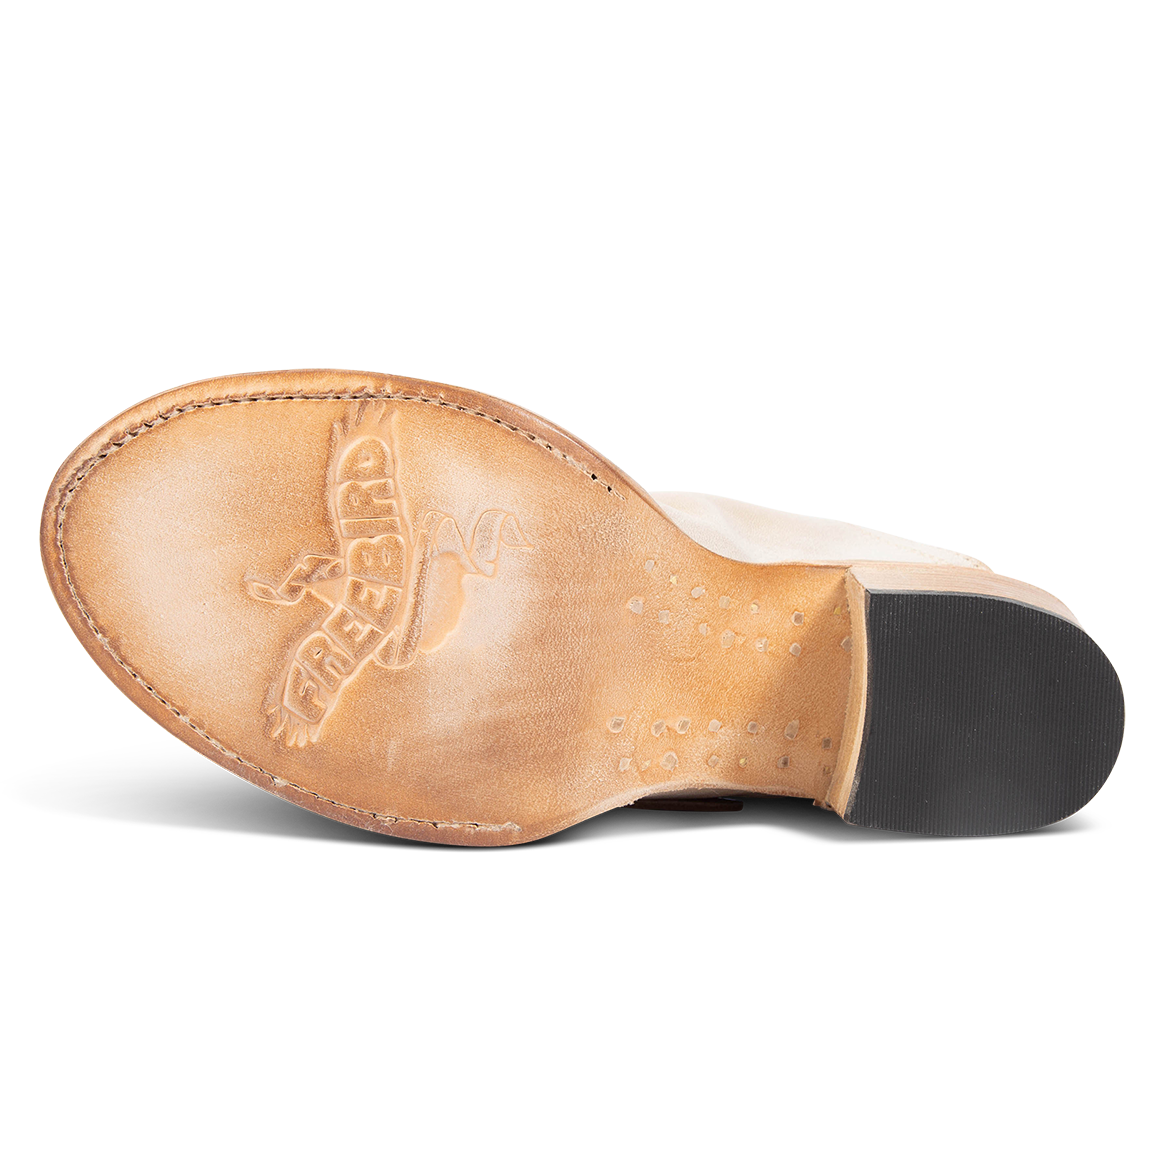 Leather sole imprinted with FREEBIRD on women's Caprice beige sandal